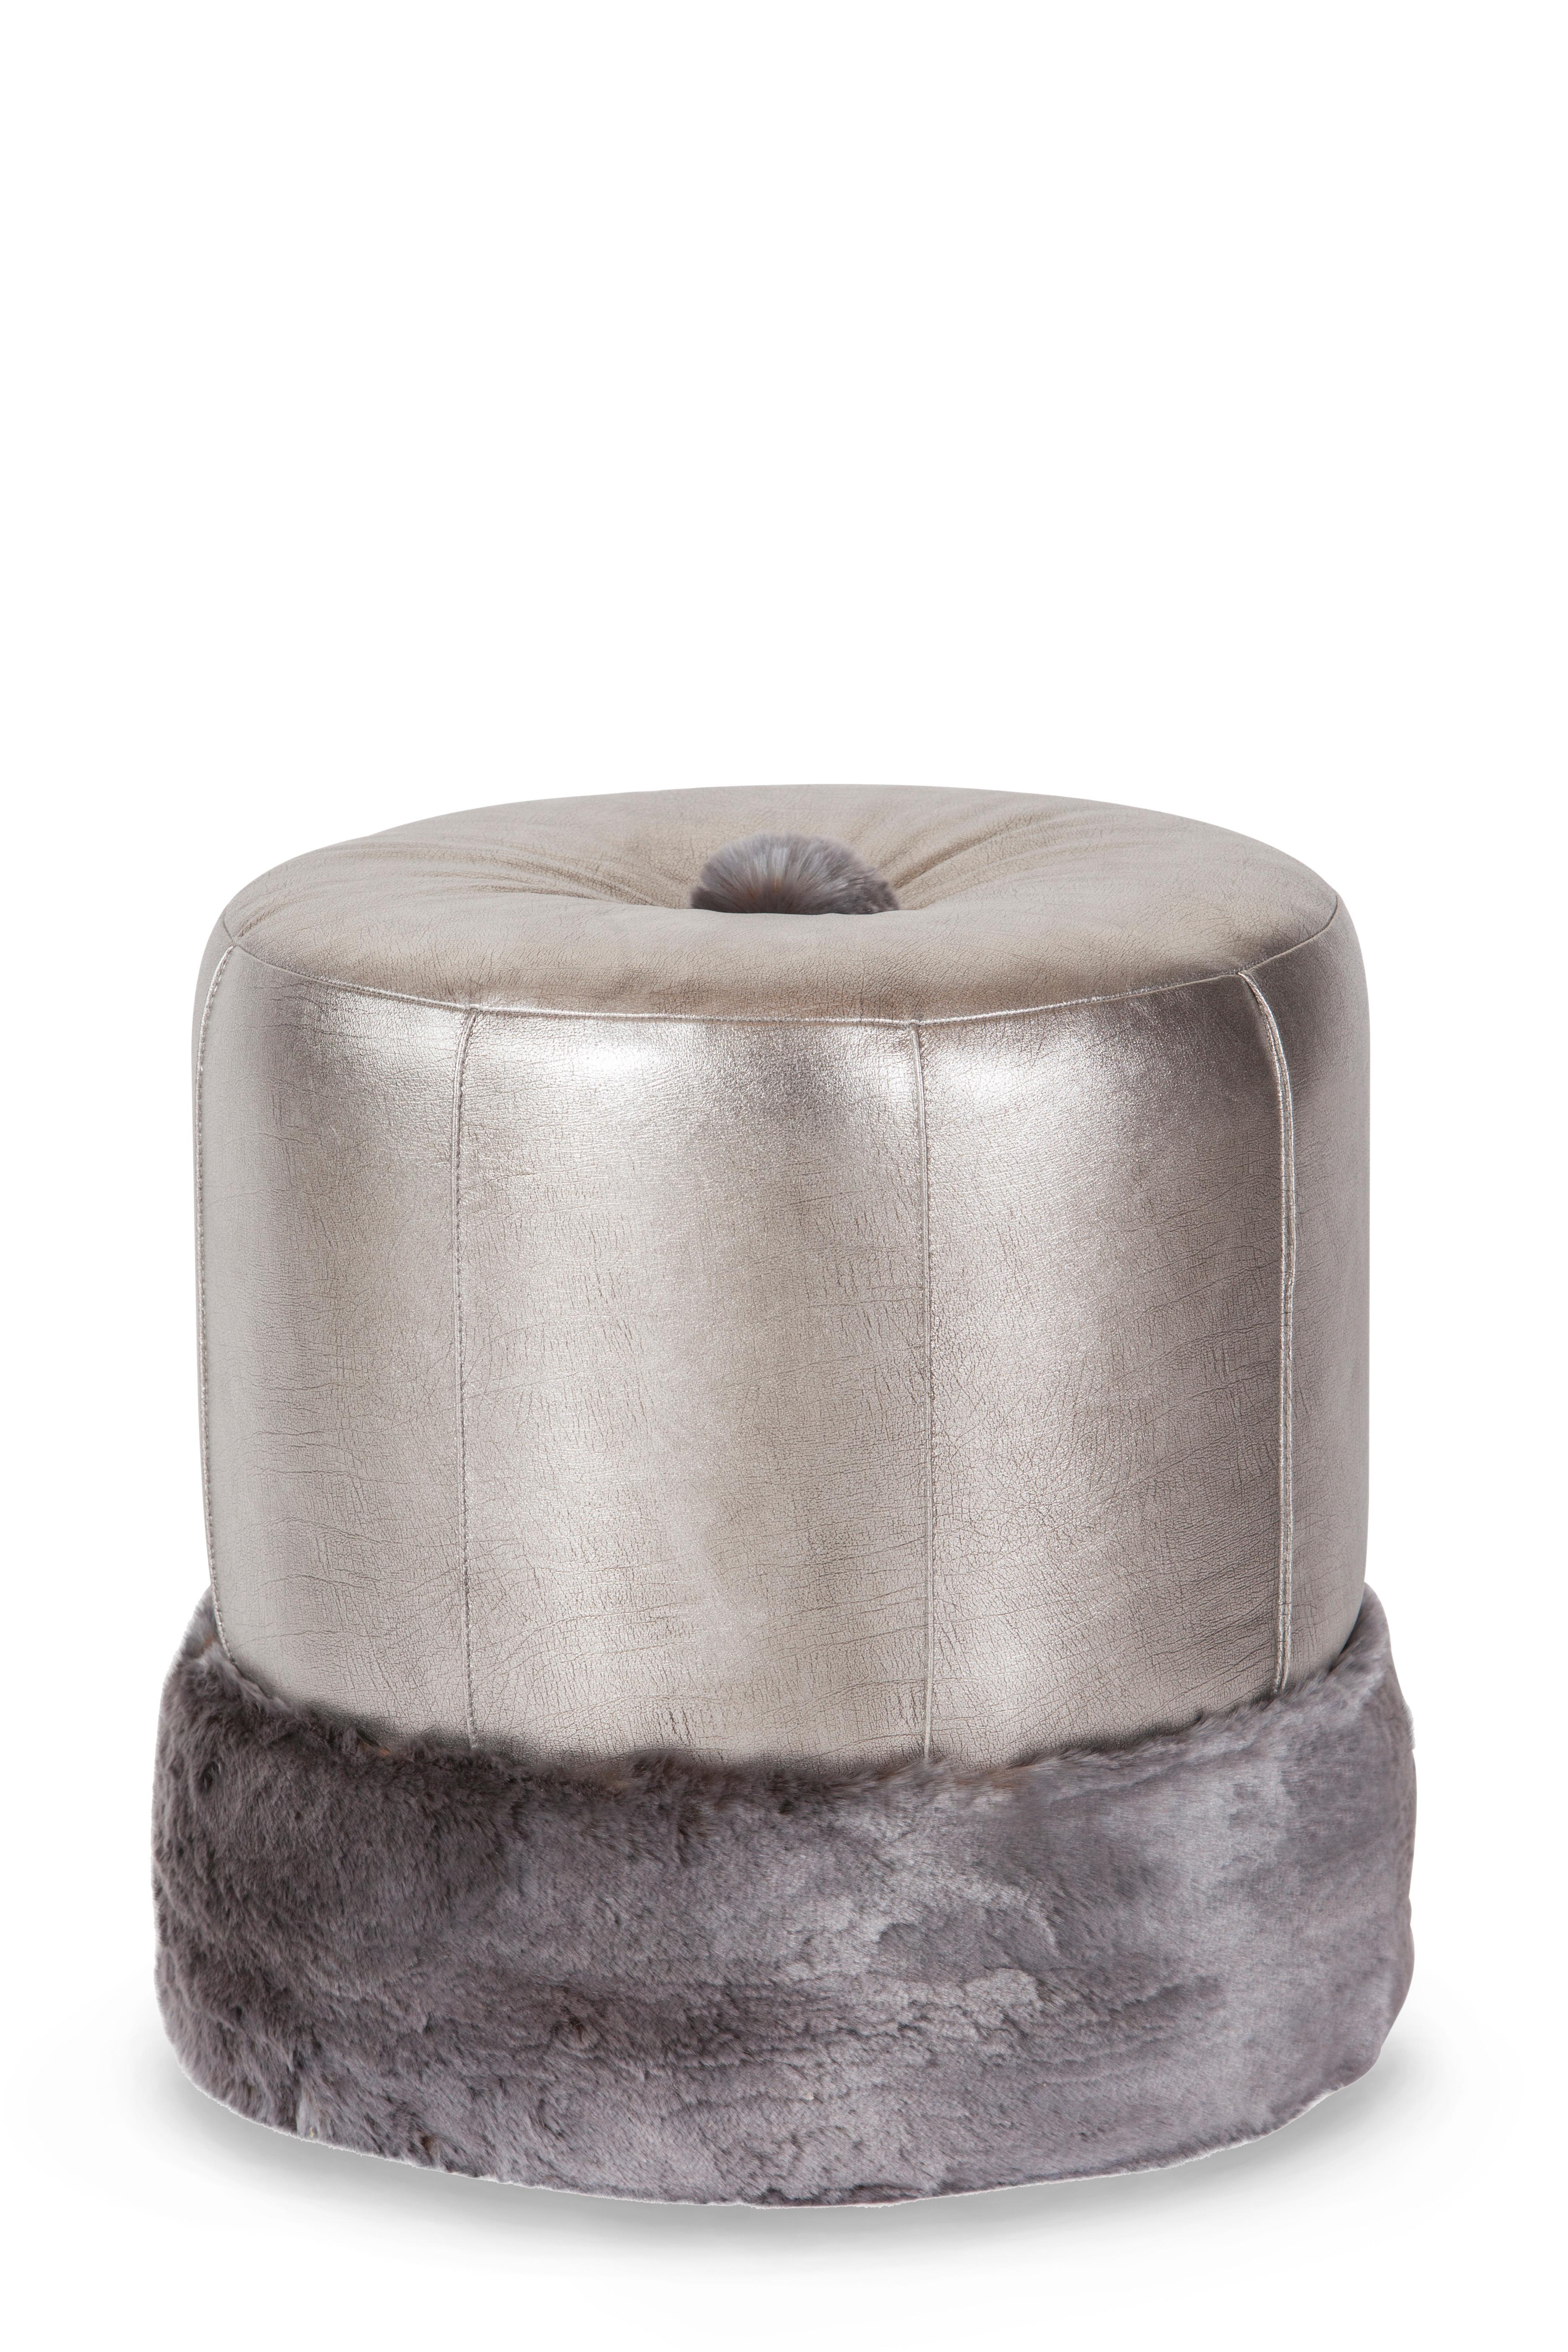 Adonis Pouf, Modern Collection, Handcrafted in Portugal - Europe by GF Modern.

A comfy pouf stool with a Mediterranean touch. Upholstered in grey dyed leather and grey faux fur, Adonis matches its name. Destined to beautify in any of its